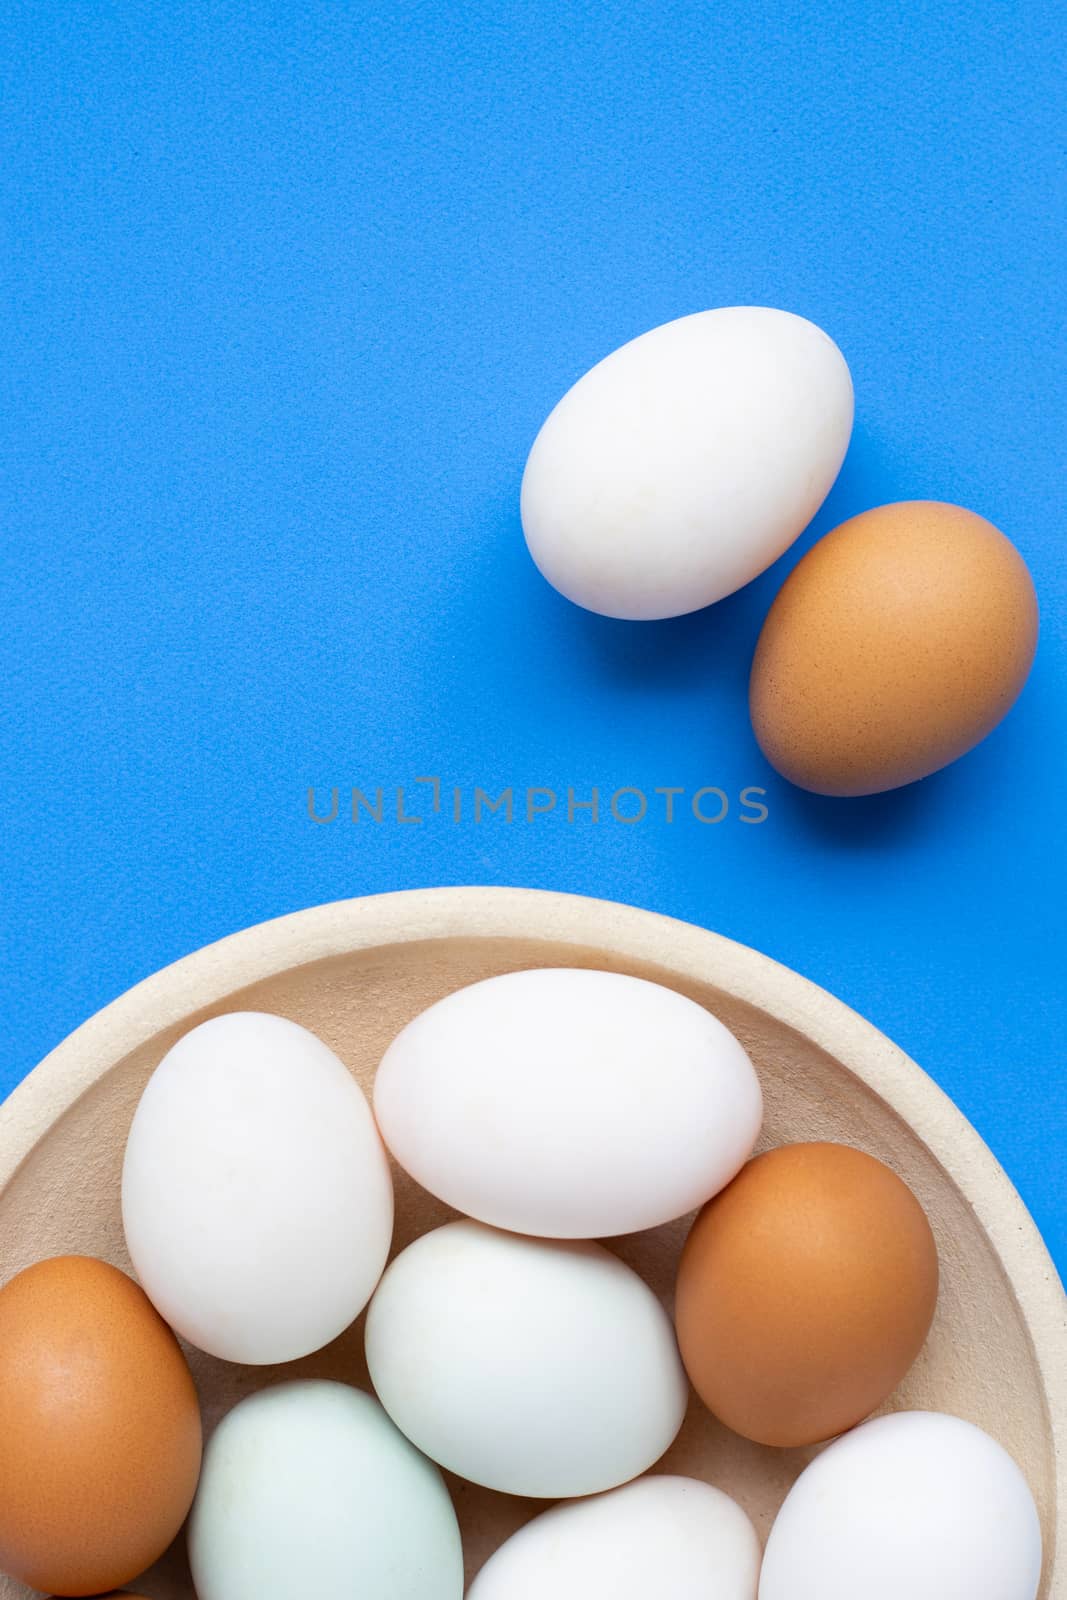 Eggs on blue background. Top view